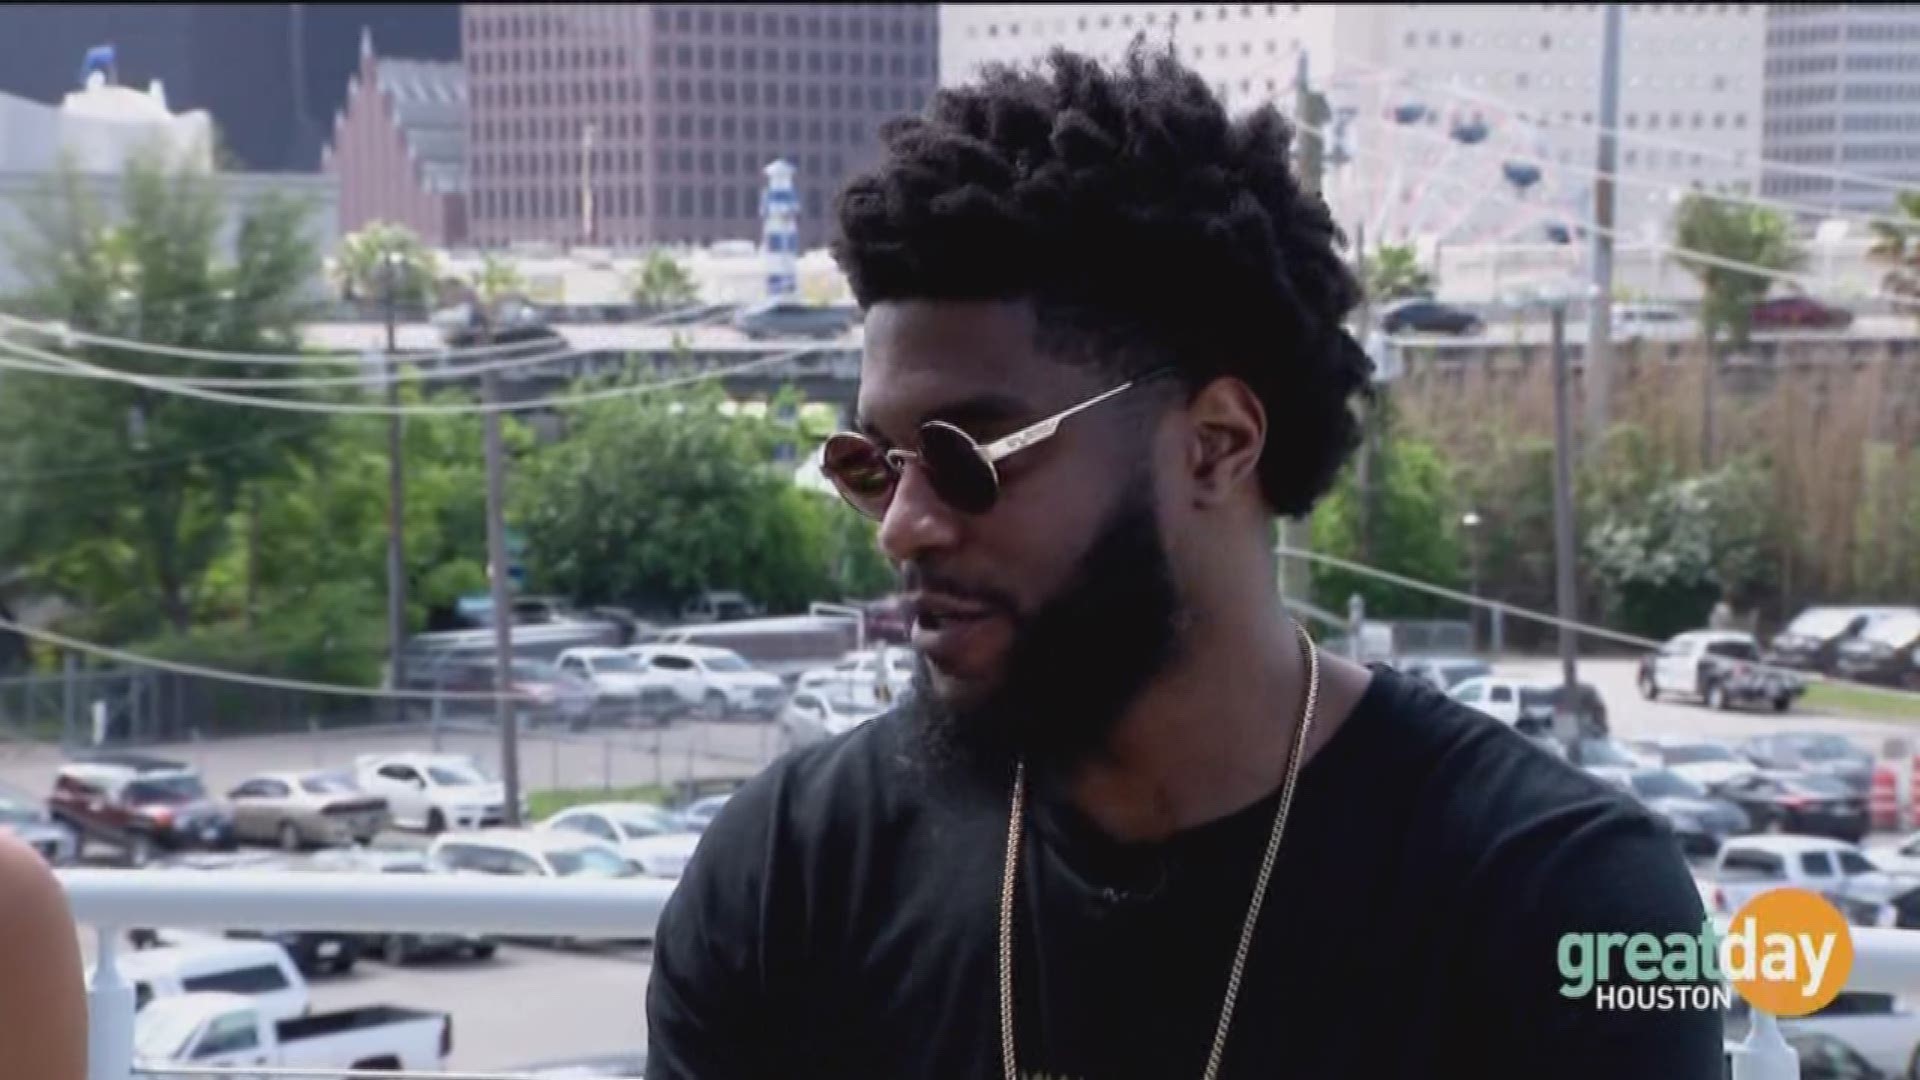 Big K.R.I.T. stops by Great Day Houston to talk his new music.